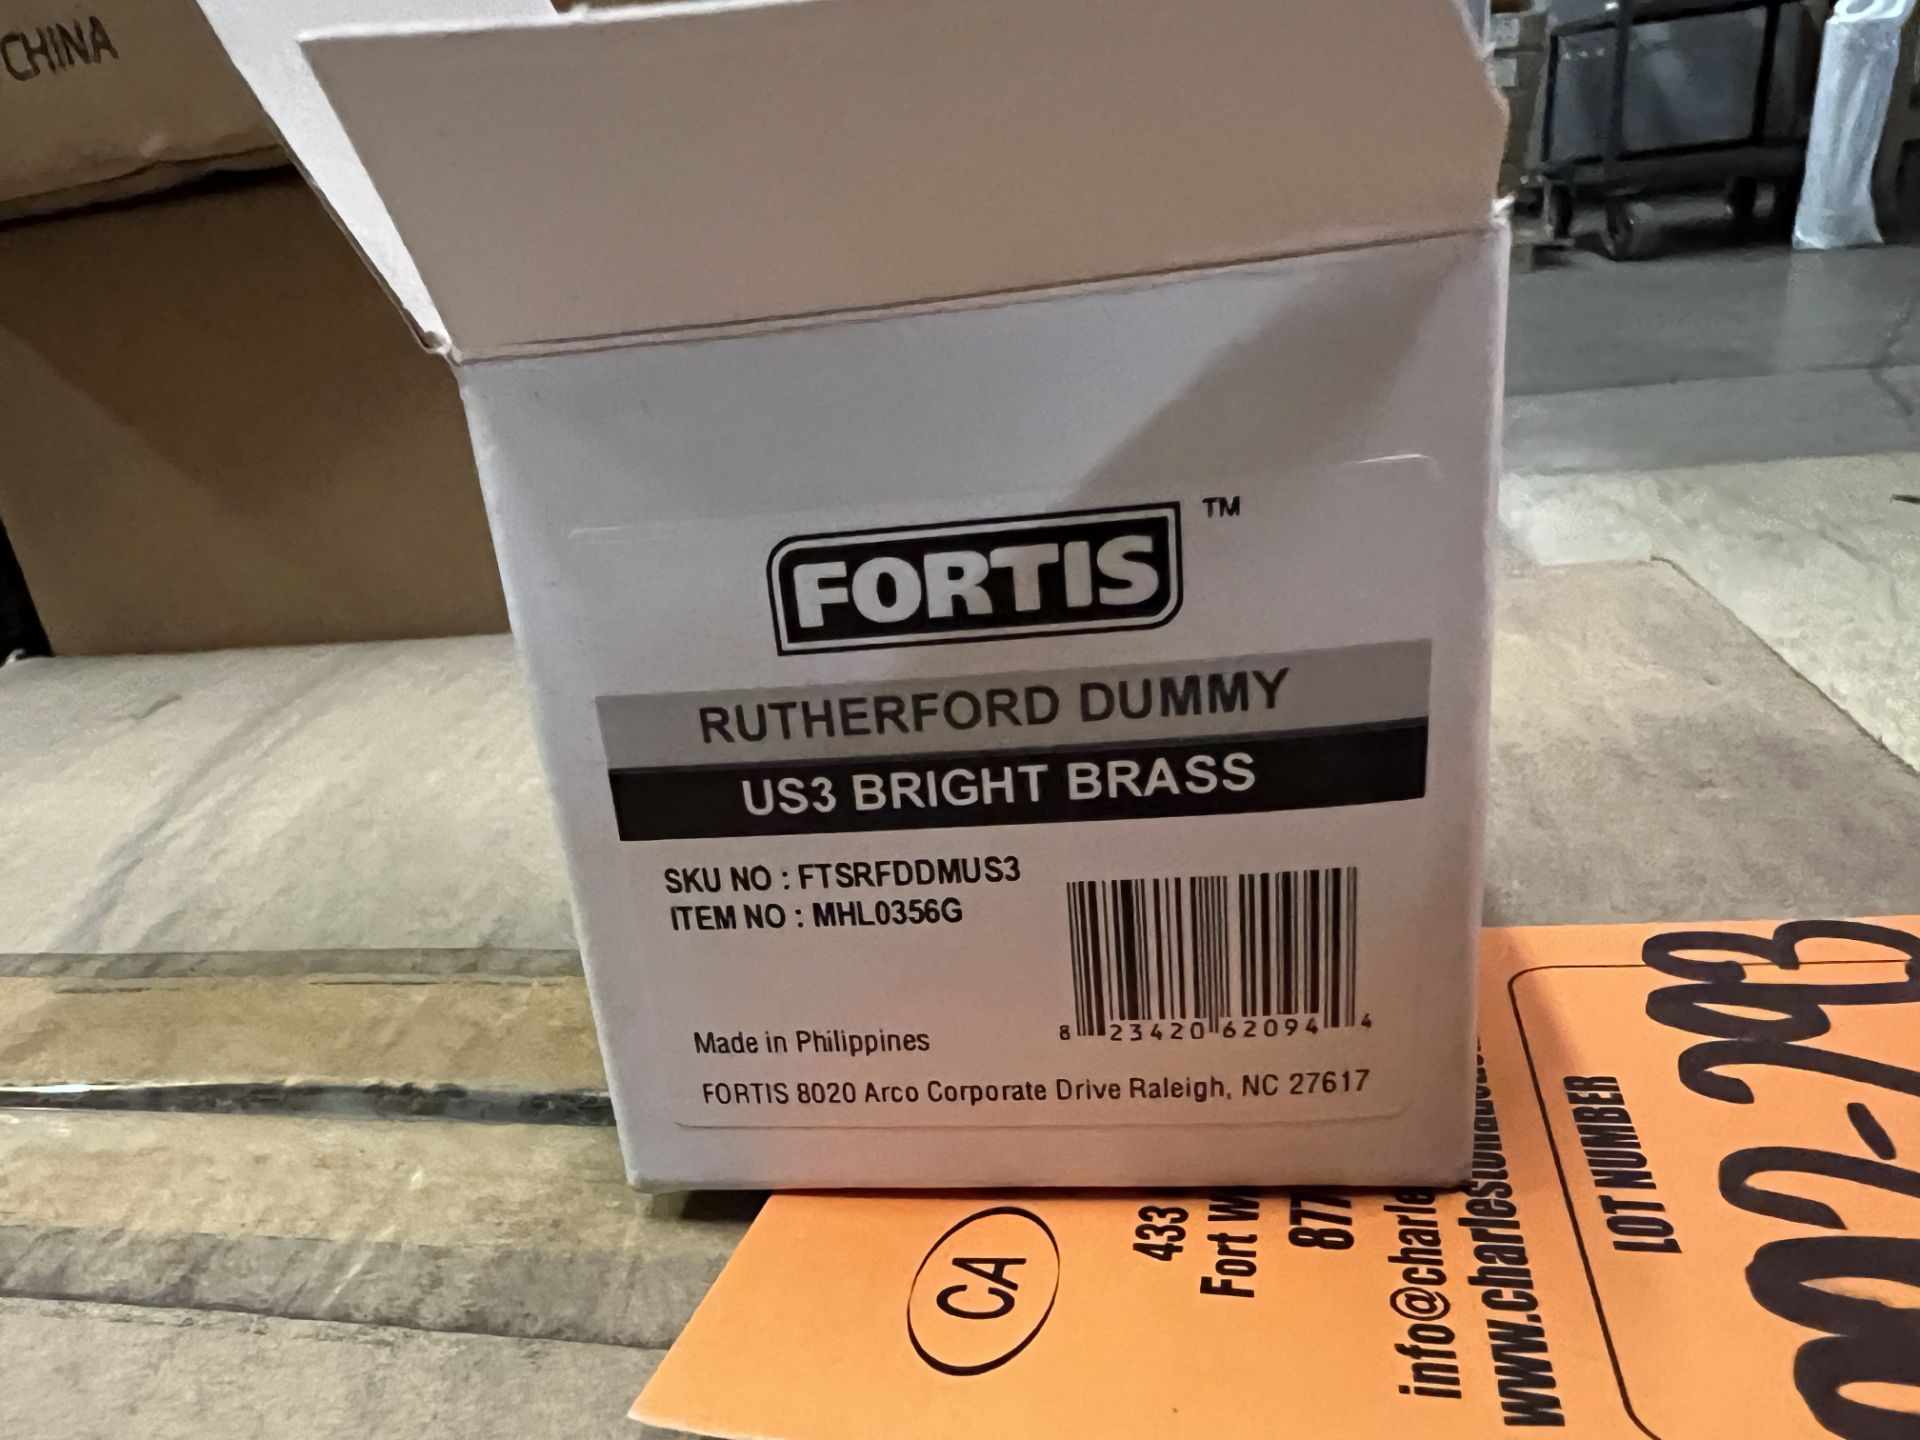 (50) FORTIS RUTHERFORD DUMMY US3 BRIGHT BRASS - Image 2 of 2